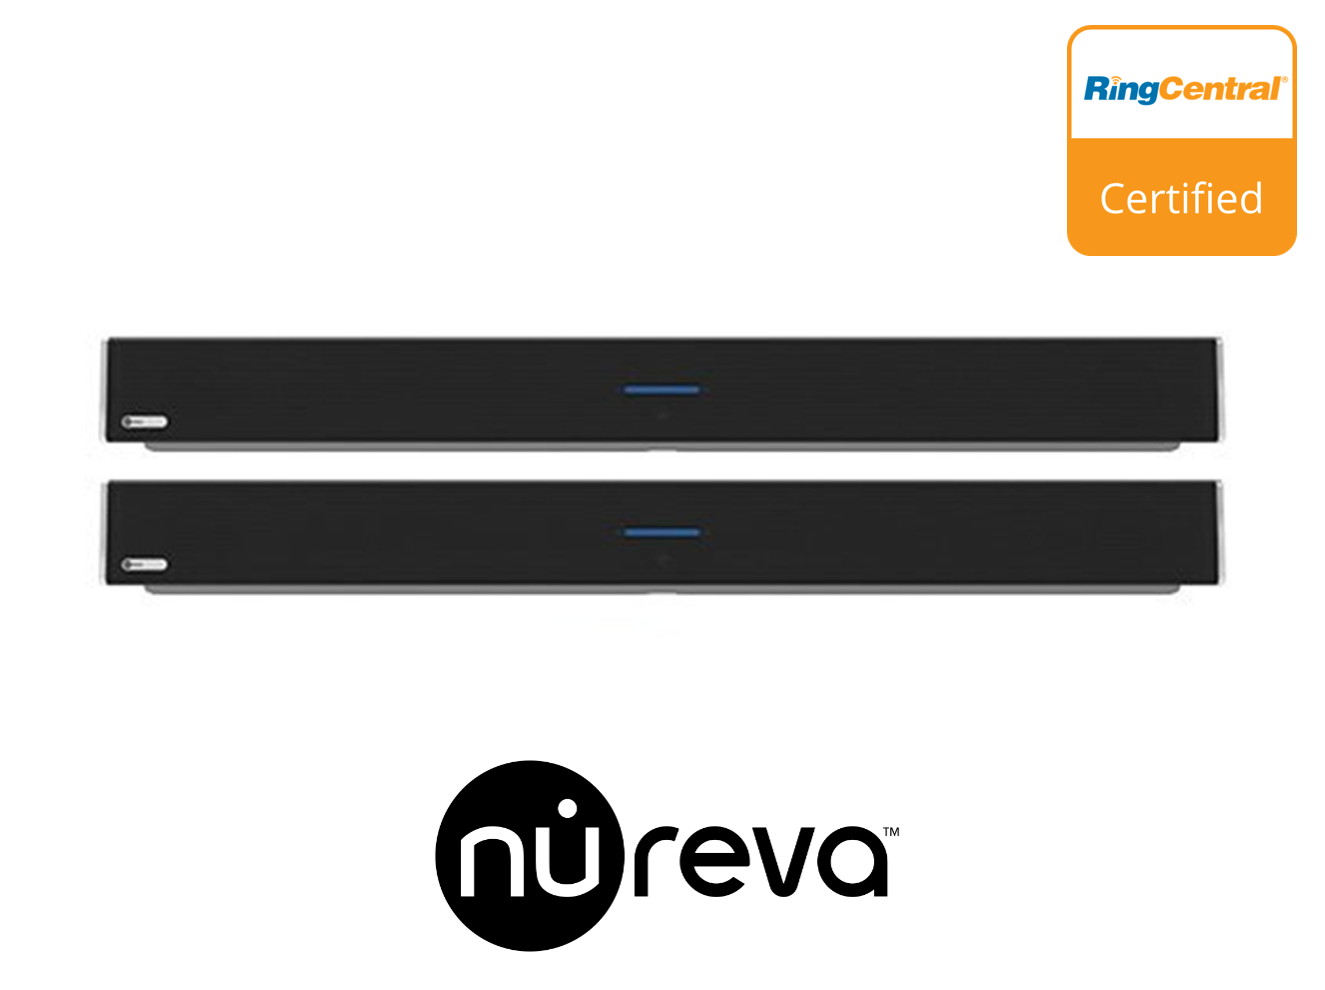 Nureva Dual HDL300 Certified by RingCentral